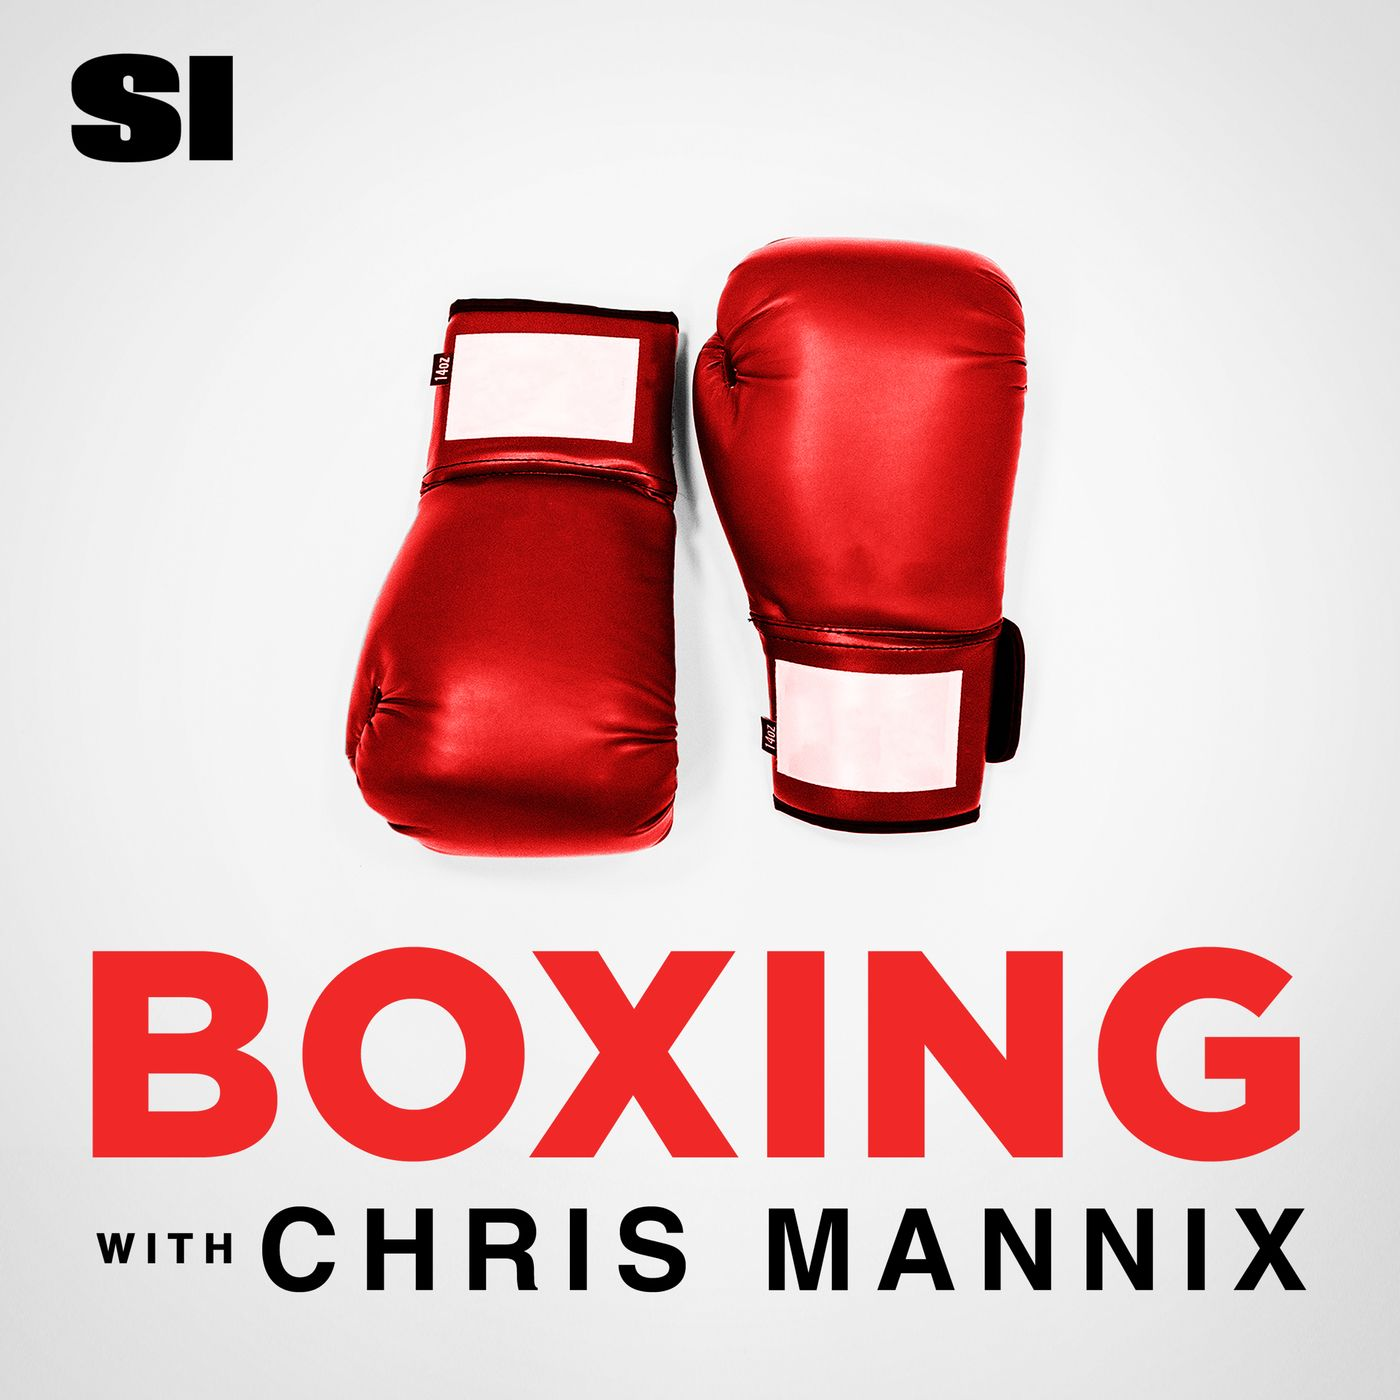 A highlight from Boxing with Chris Mannix - How womens boxing could someday surpass mens boxing in popularity